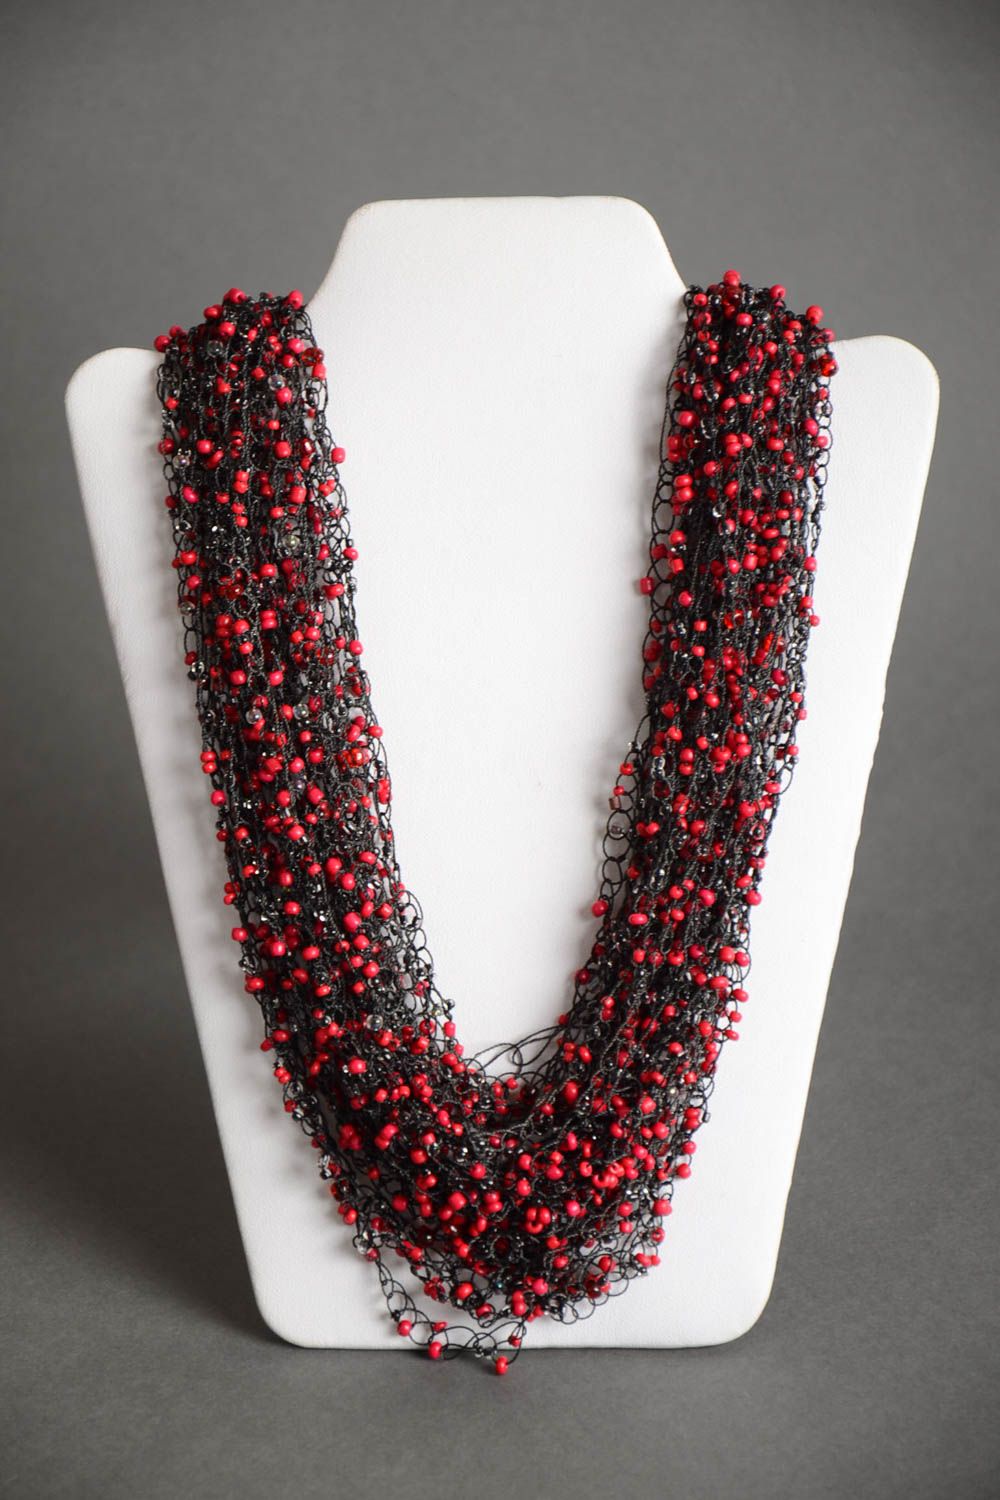 Handmade crocheted beaded necklace in passionate red and black color combination photo 2